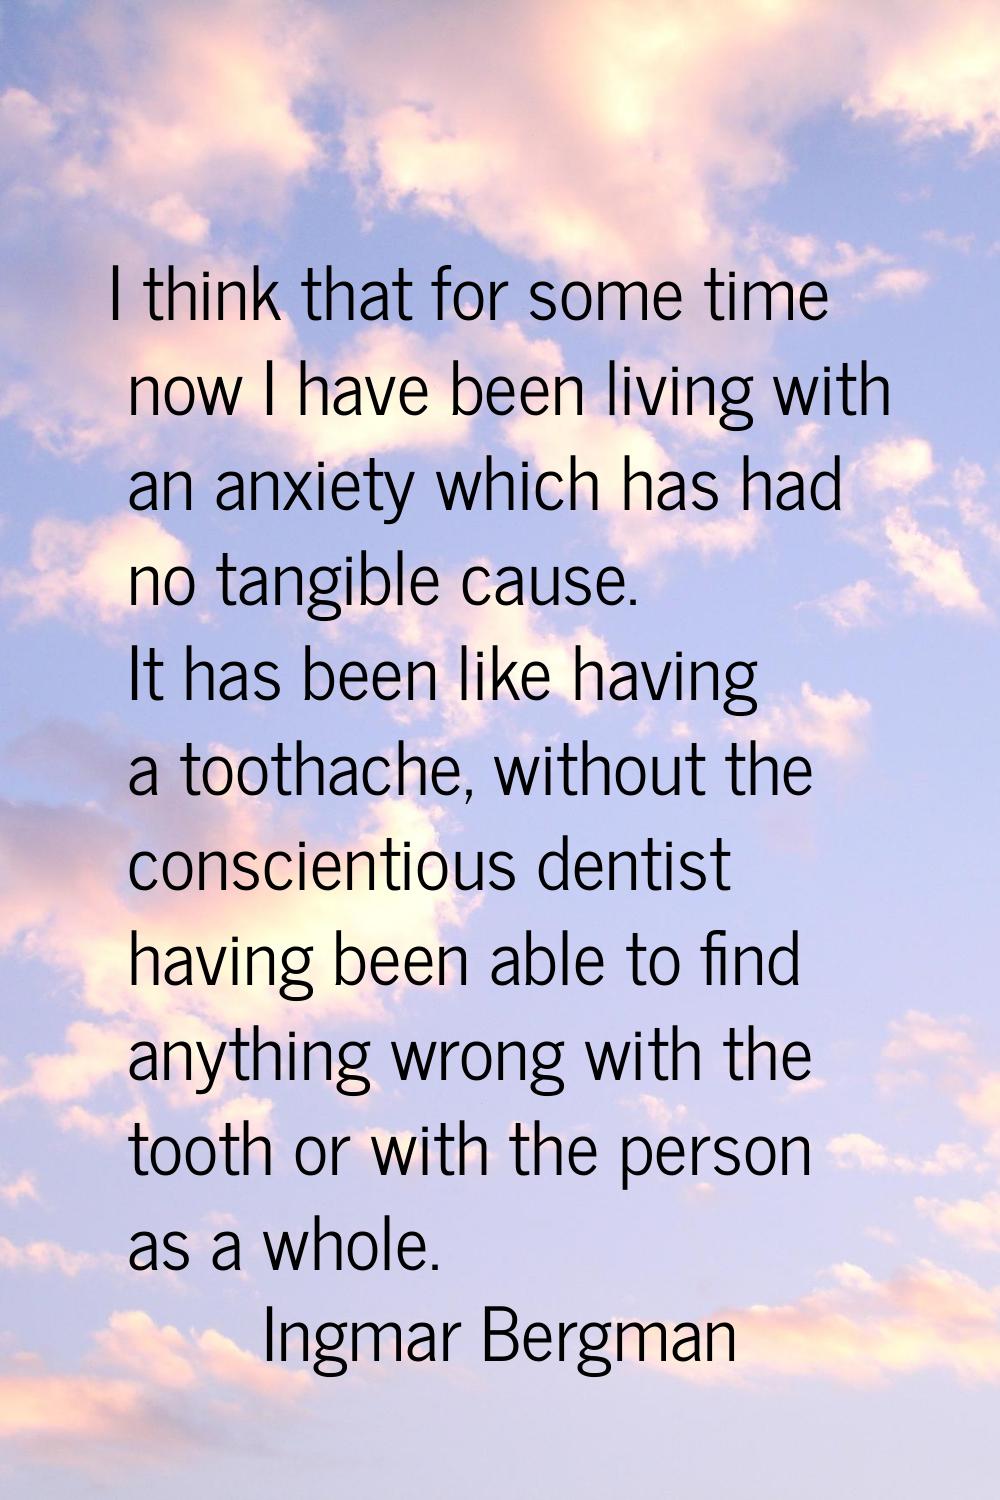 I think that for some time now I have been living with an anxiety which has had no tangible cause. 